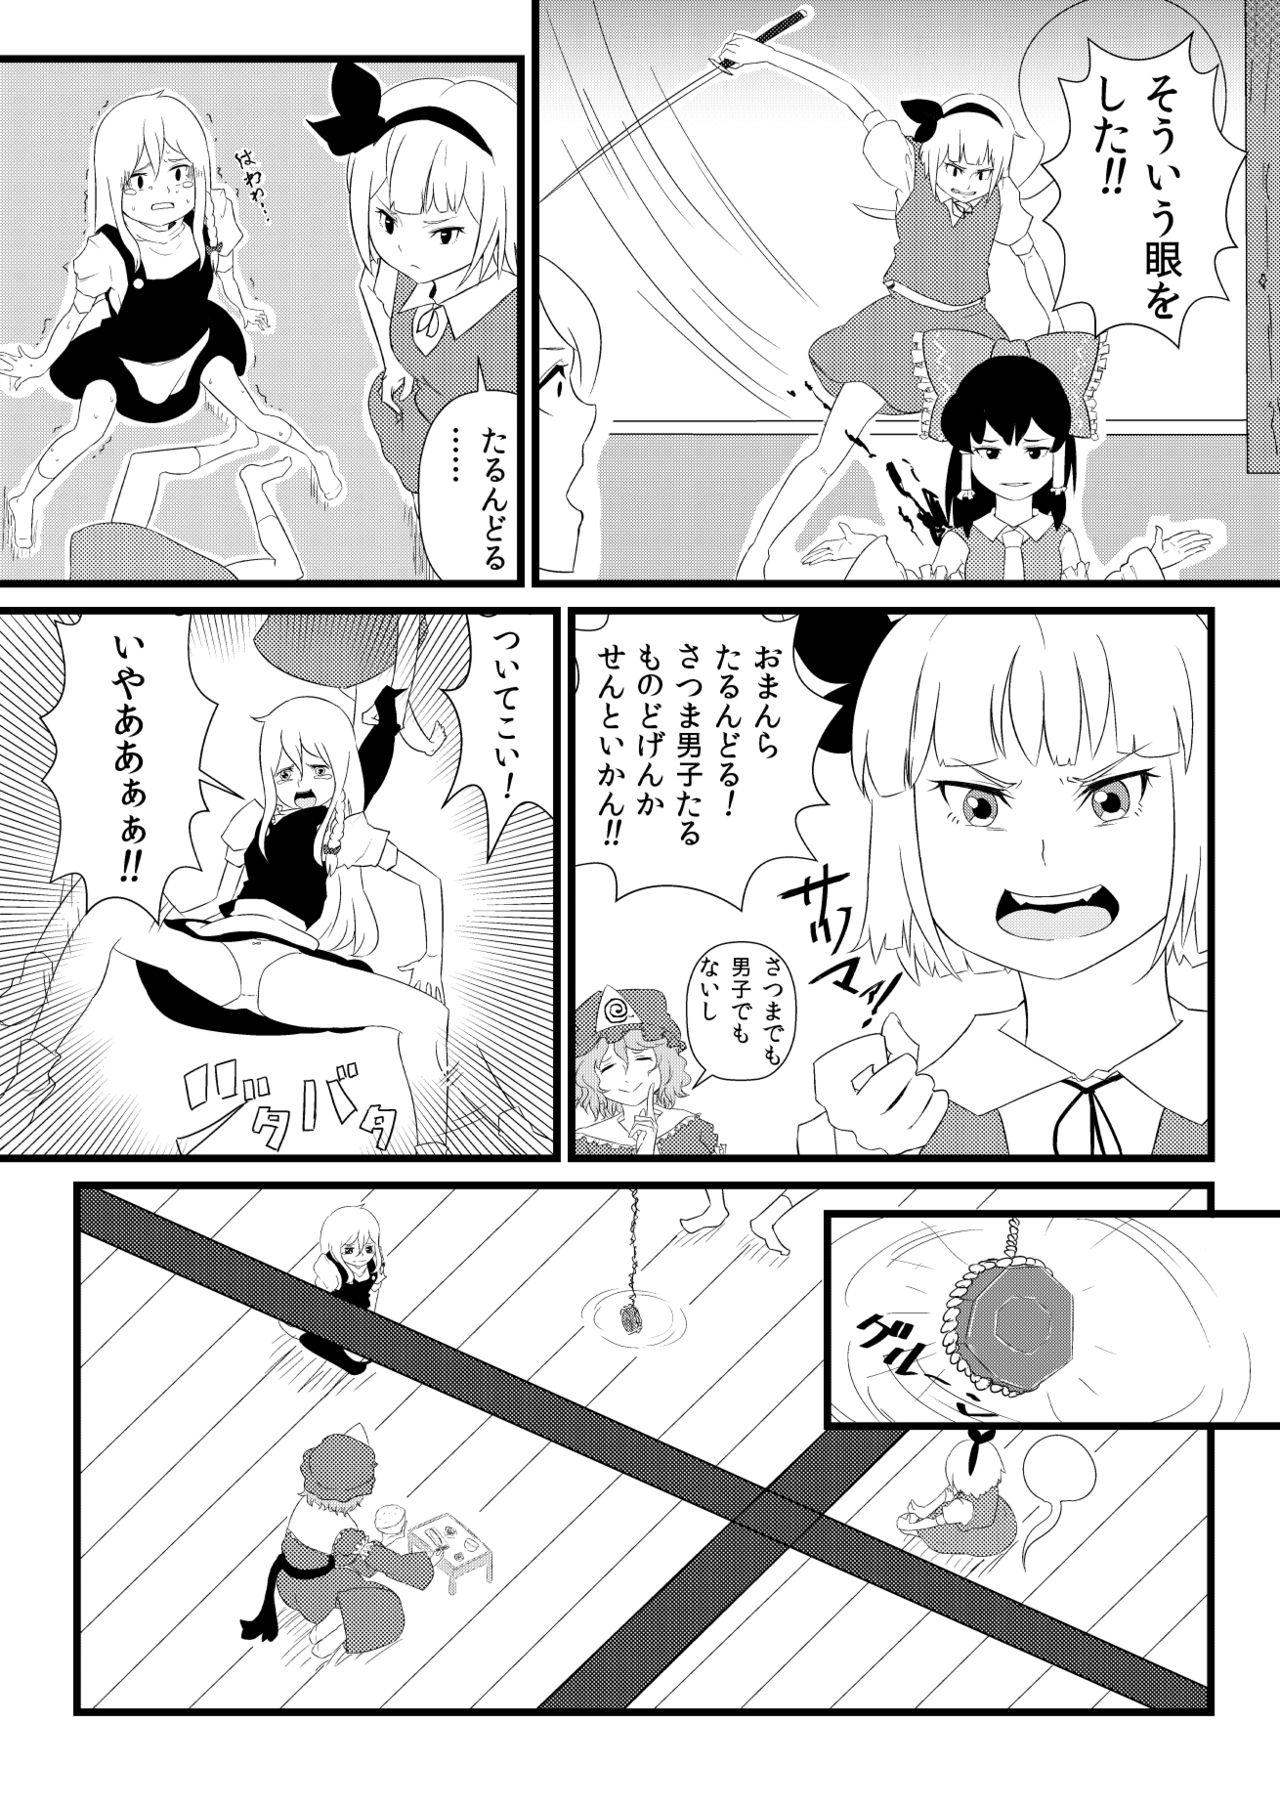 Perfect Tits 東方板としあき合同誌5 - Touhou project Real Amateur - Page 3